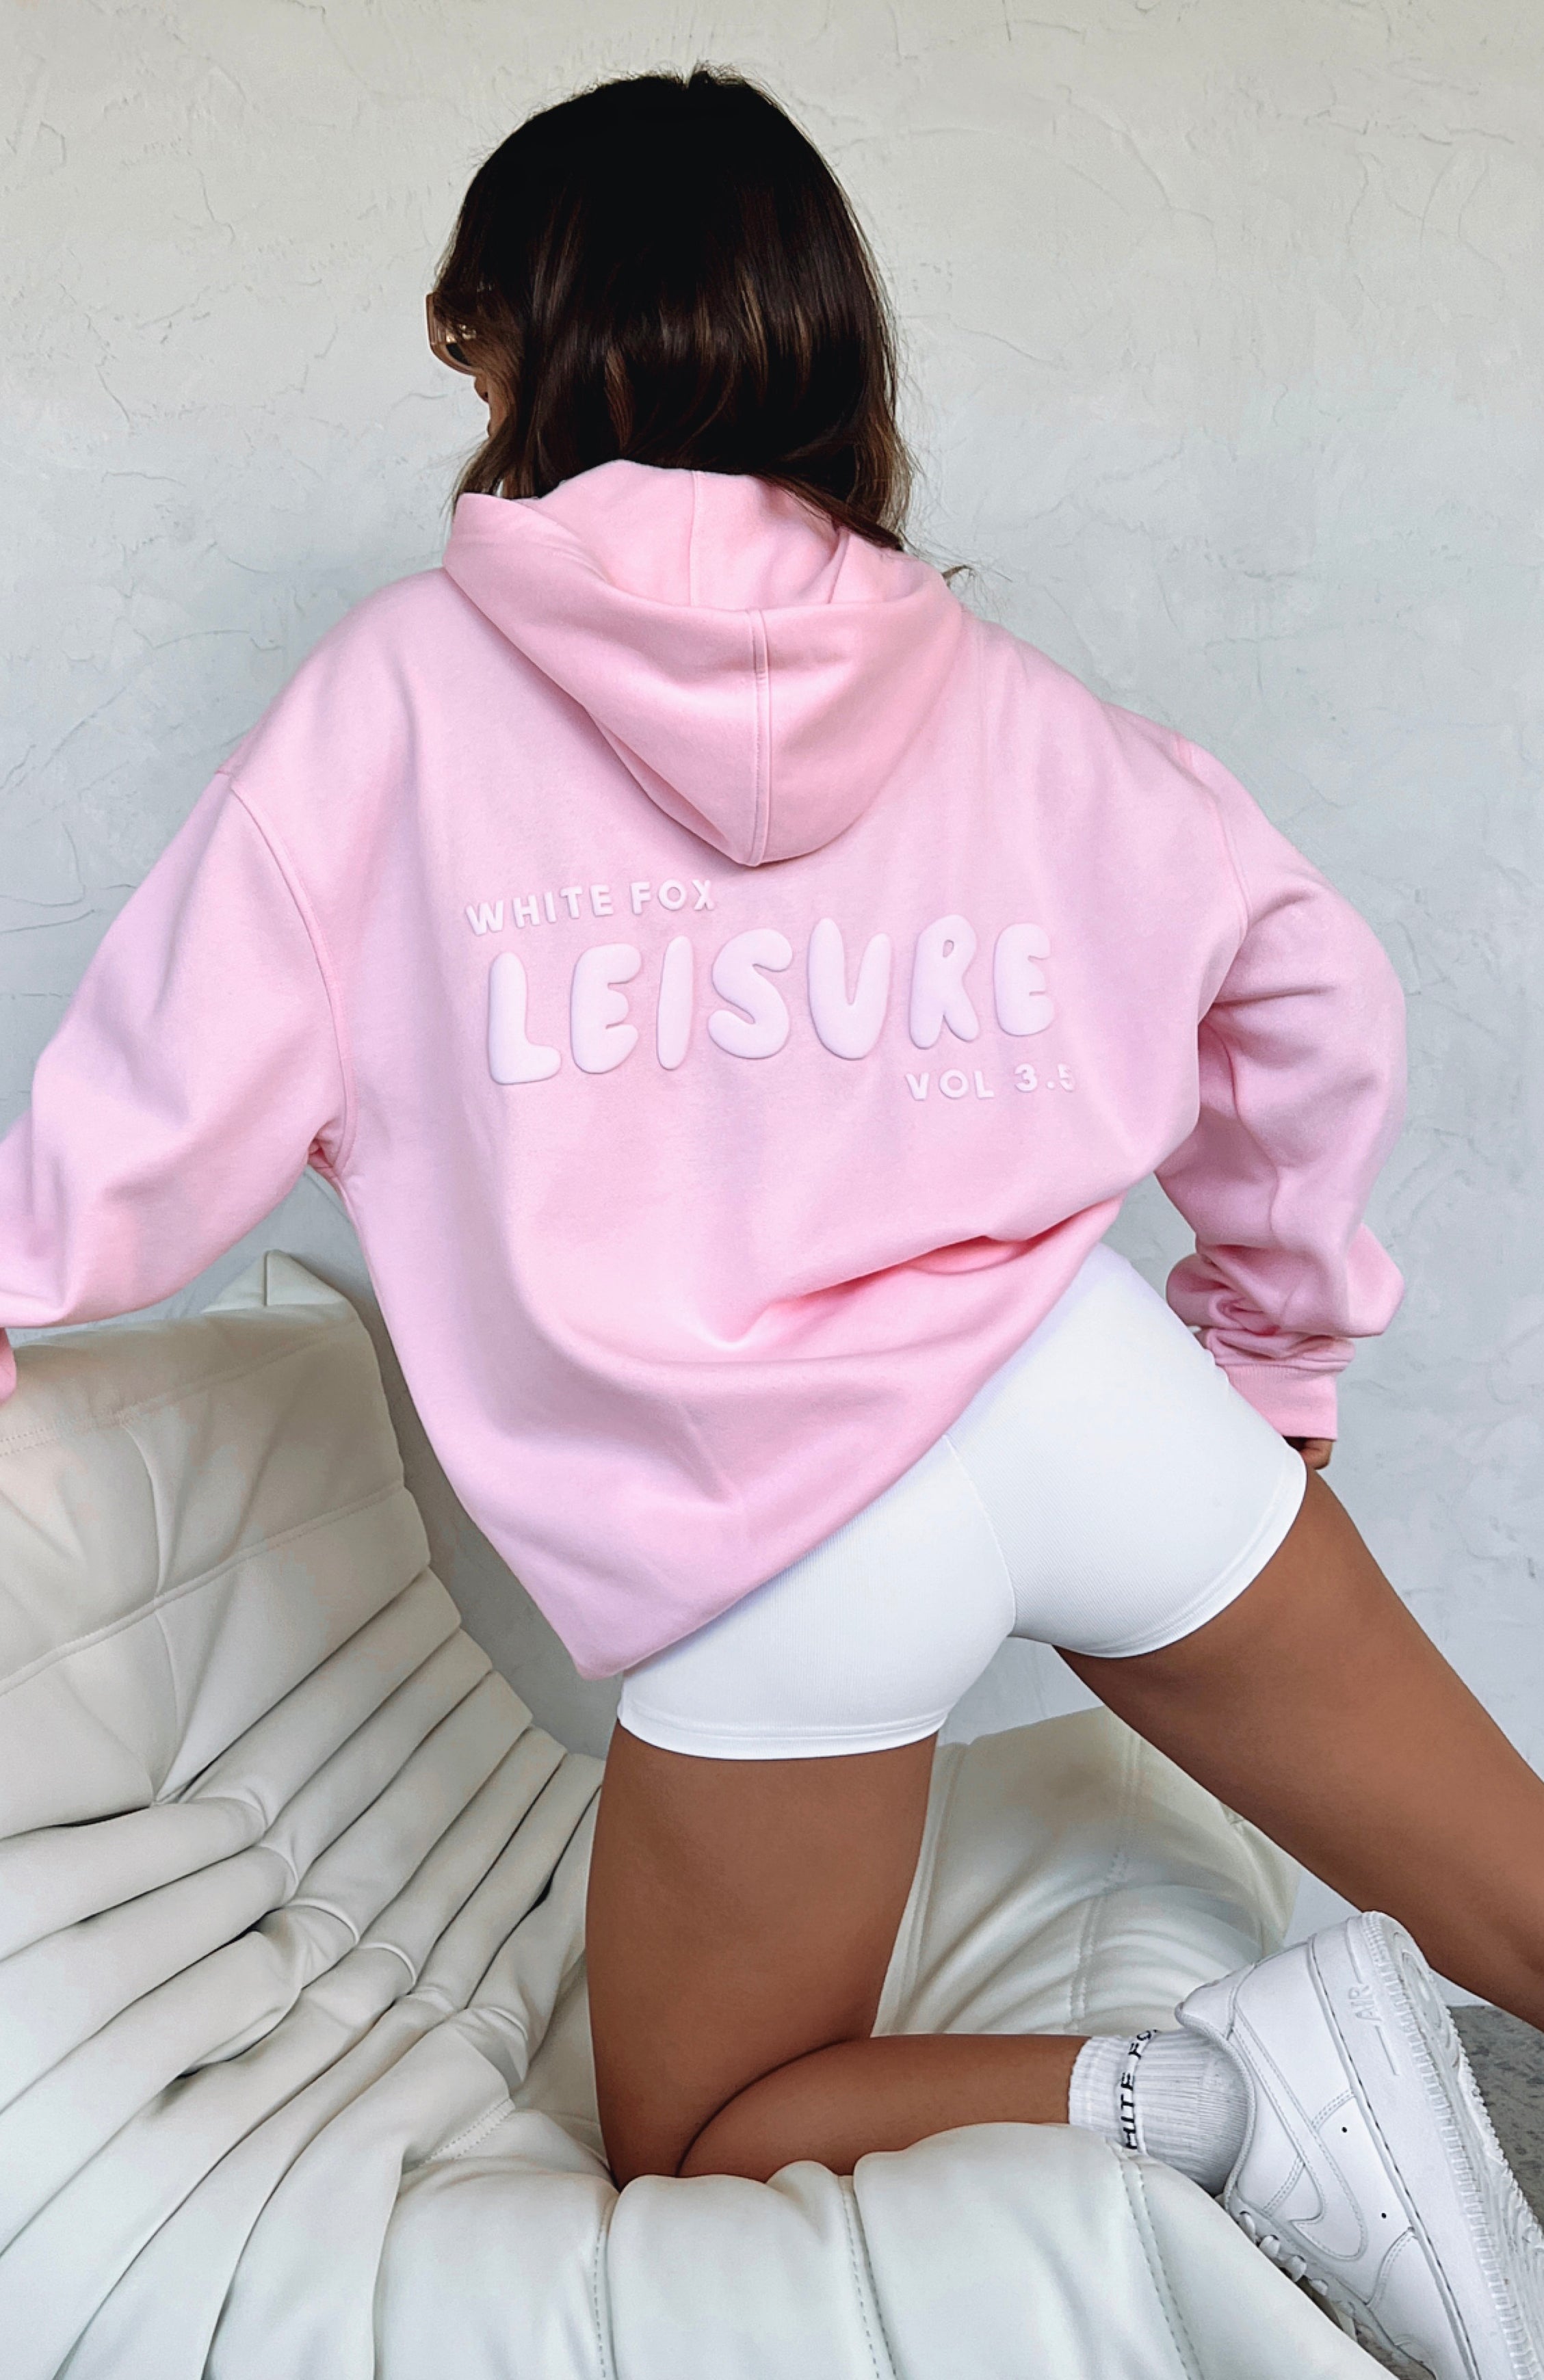 Sunday Love Oversized Hoodie in Hot Pink